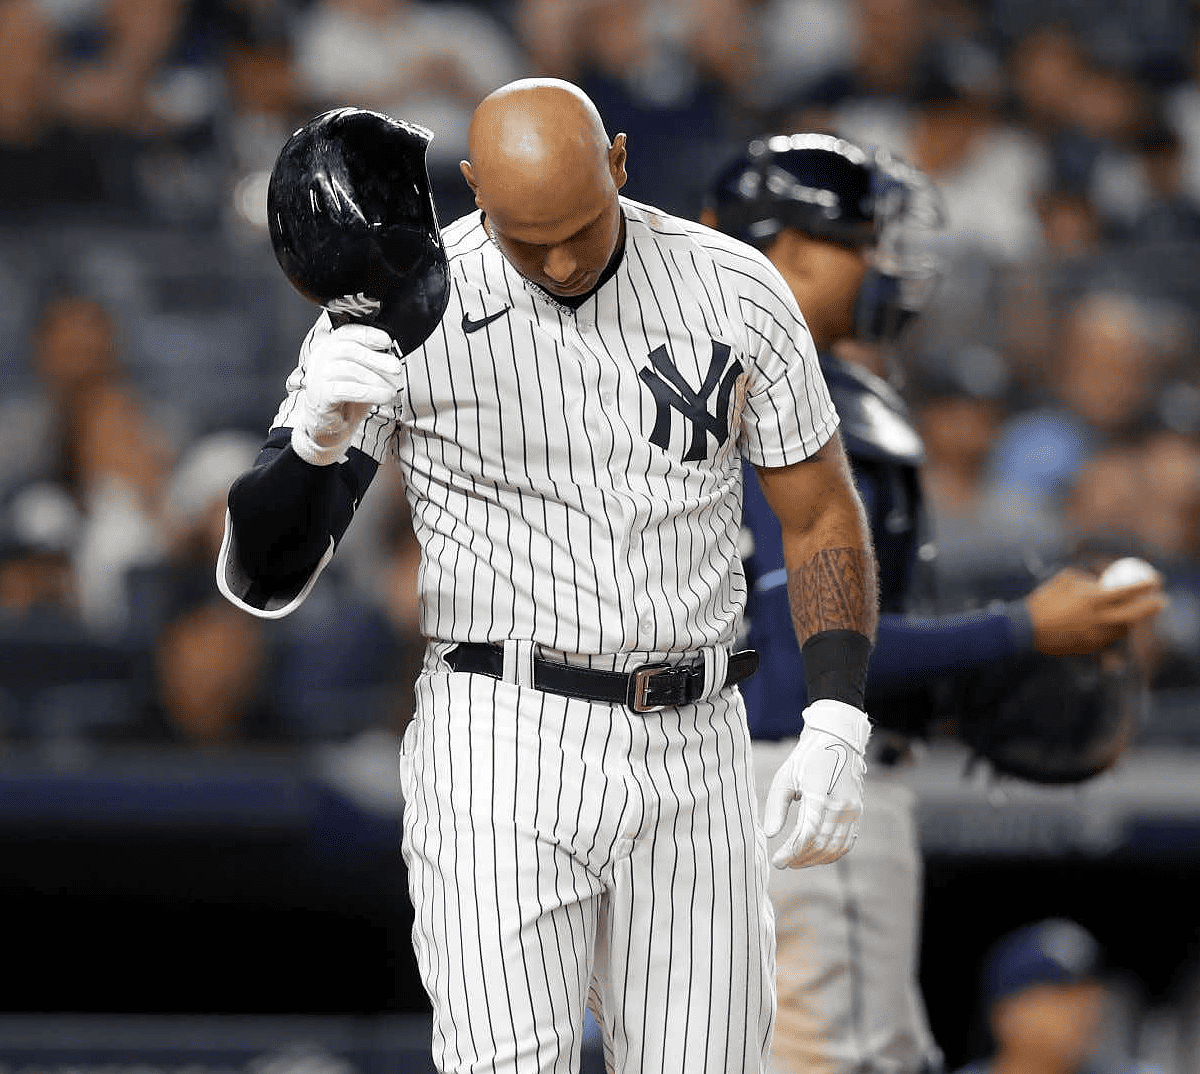 Aaron Hicks: What is his future with New York Yankees?